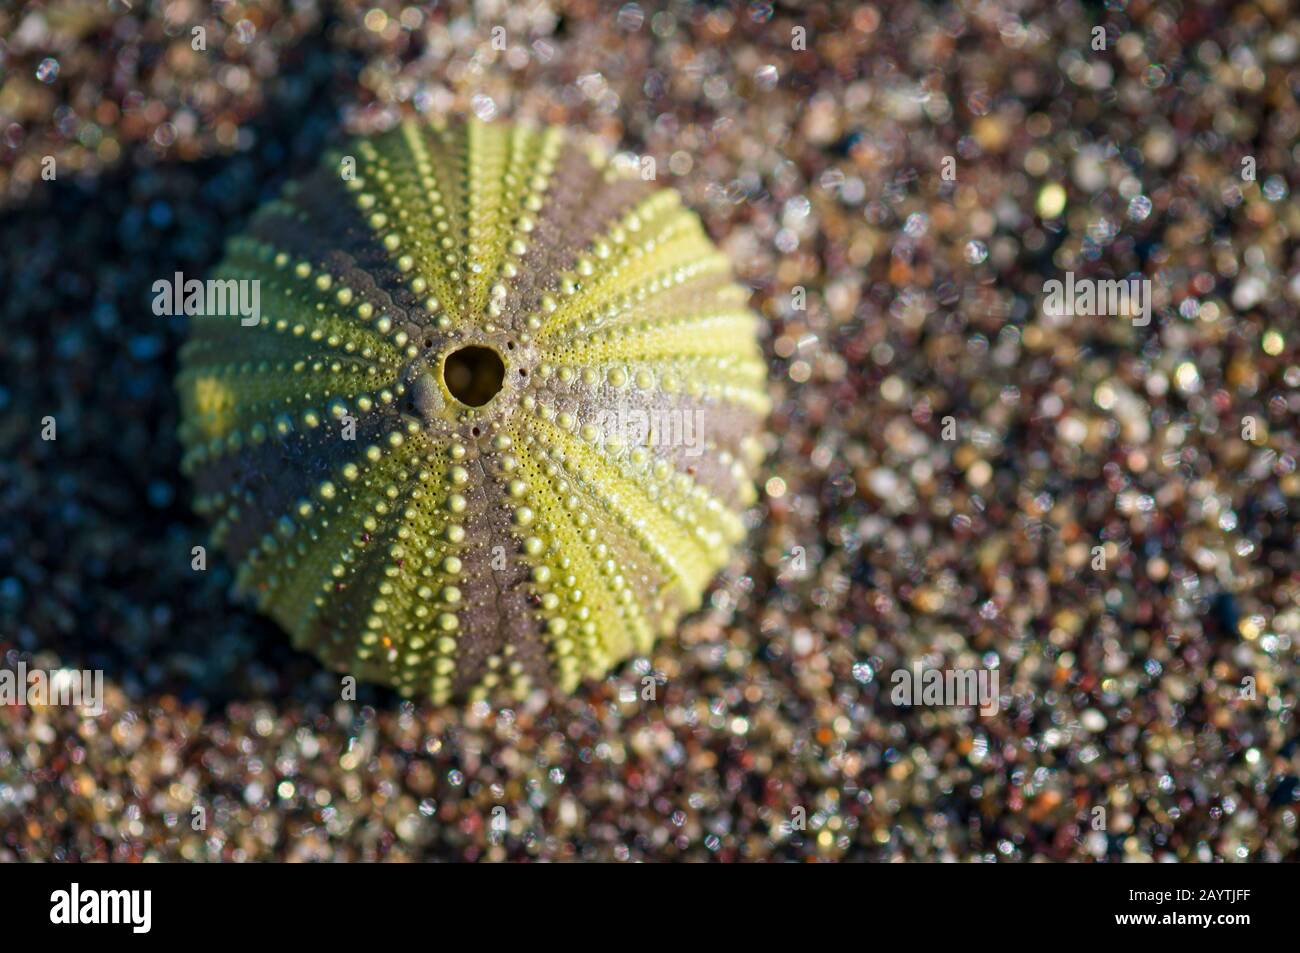 Shell of a green sea urchin resting in fine pebble sand on a beach in the Galapagos Islands Stock Photo